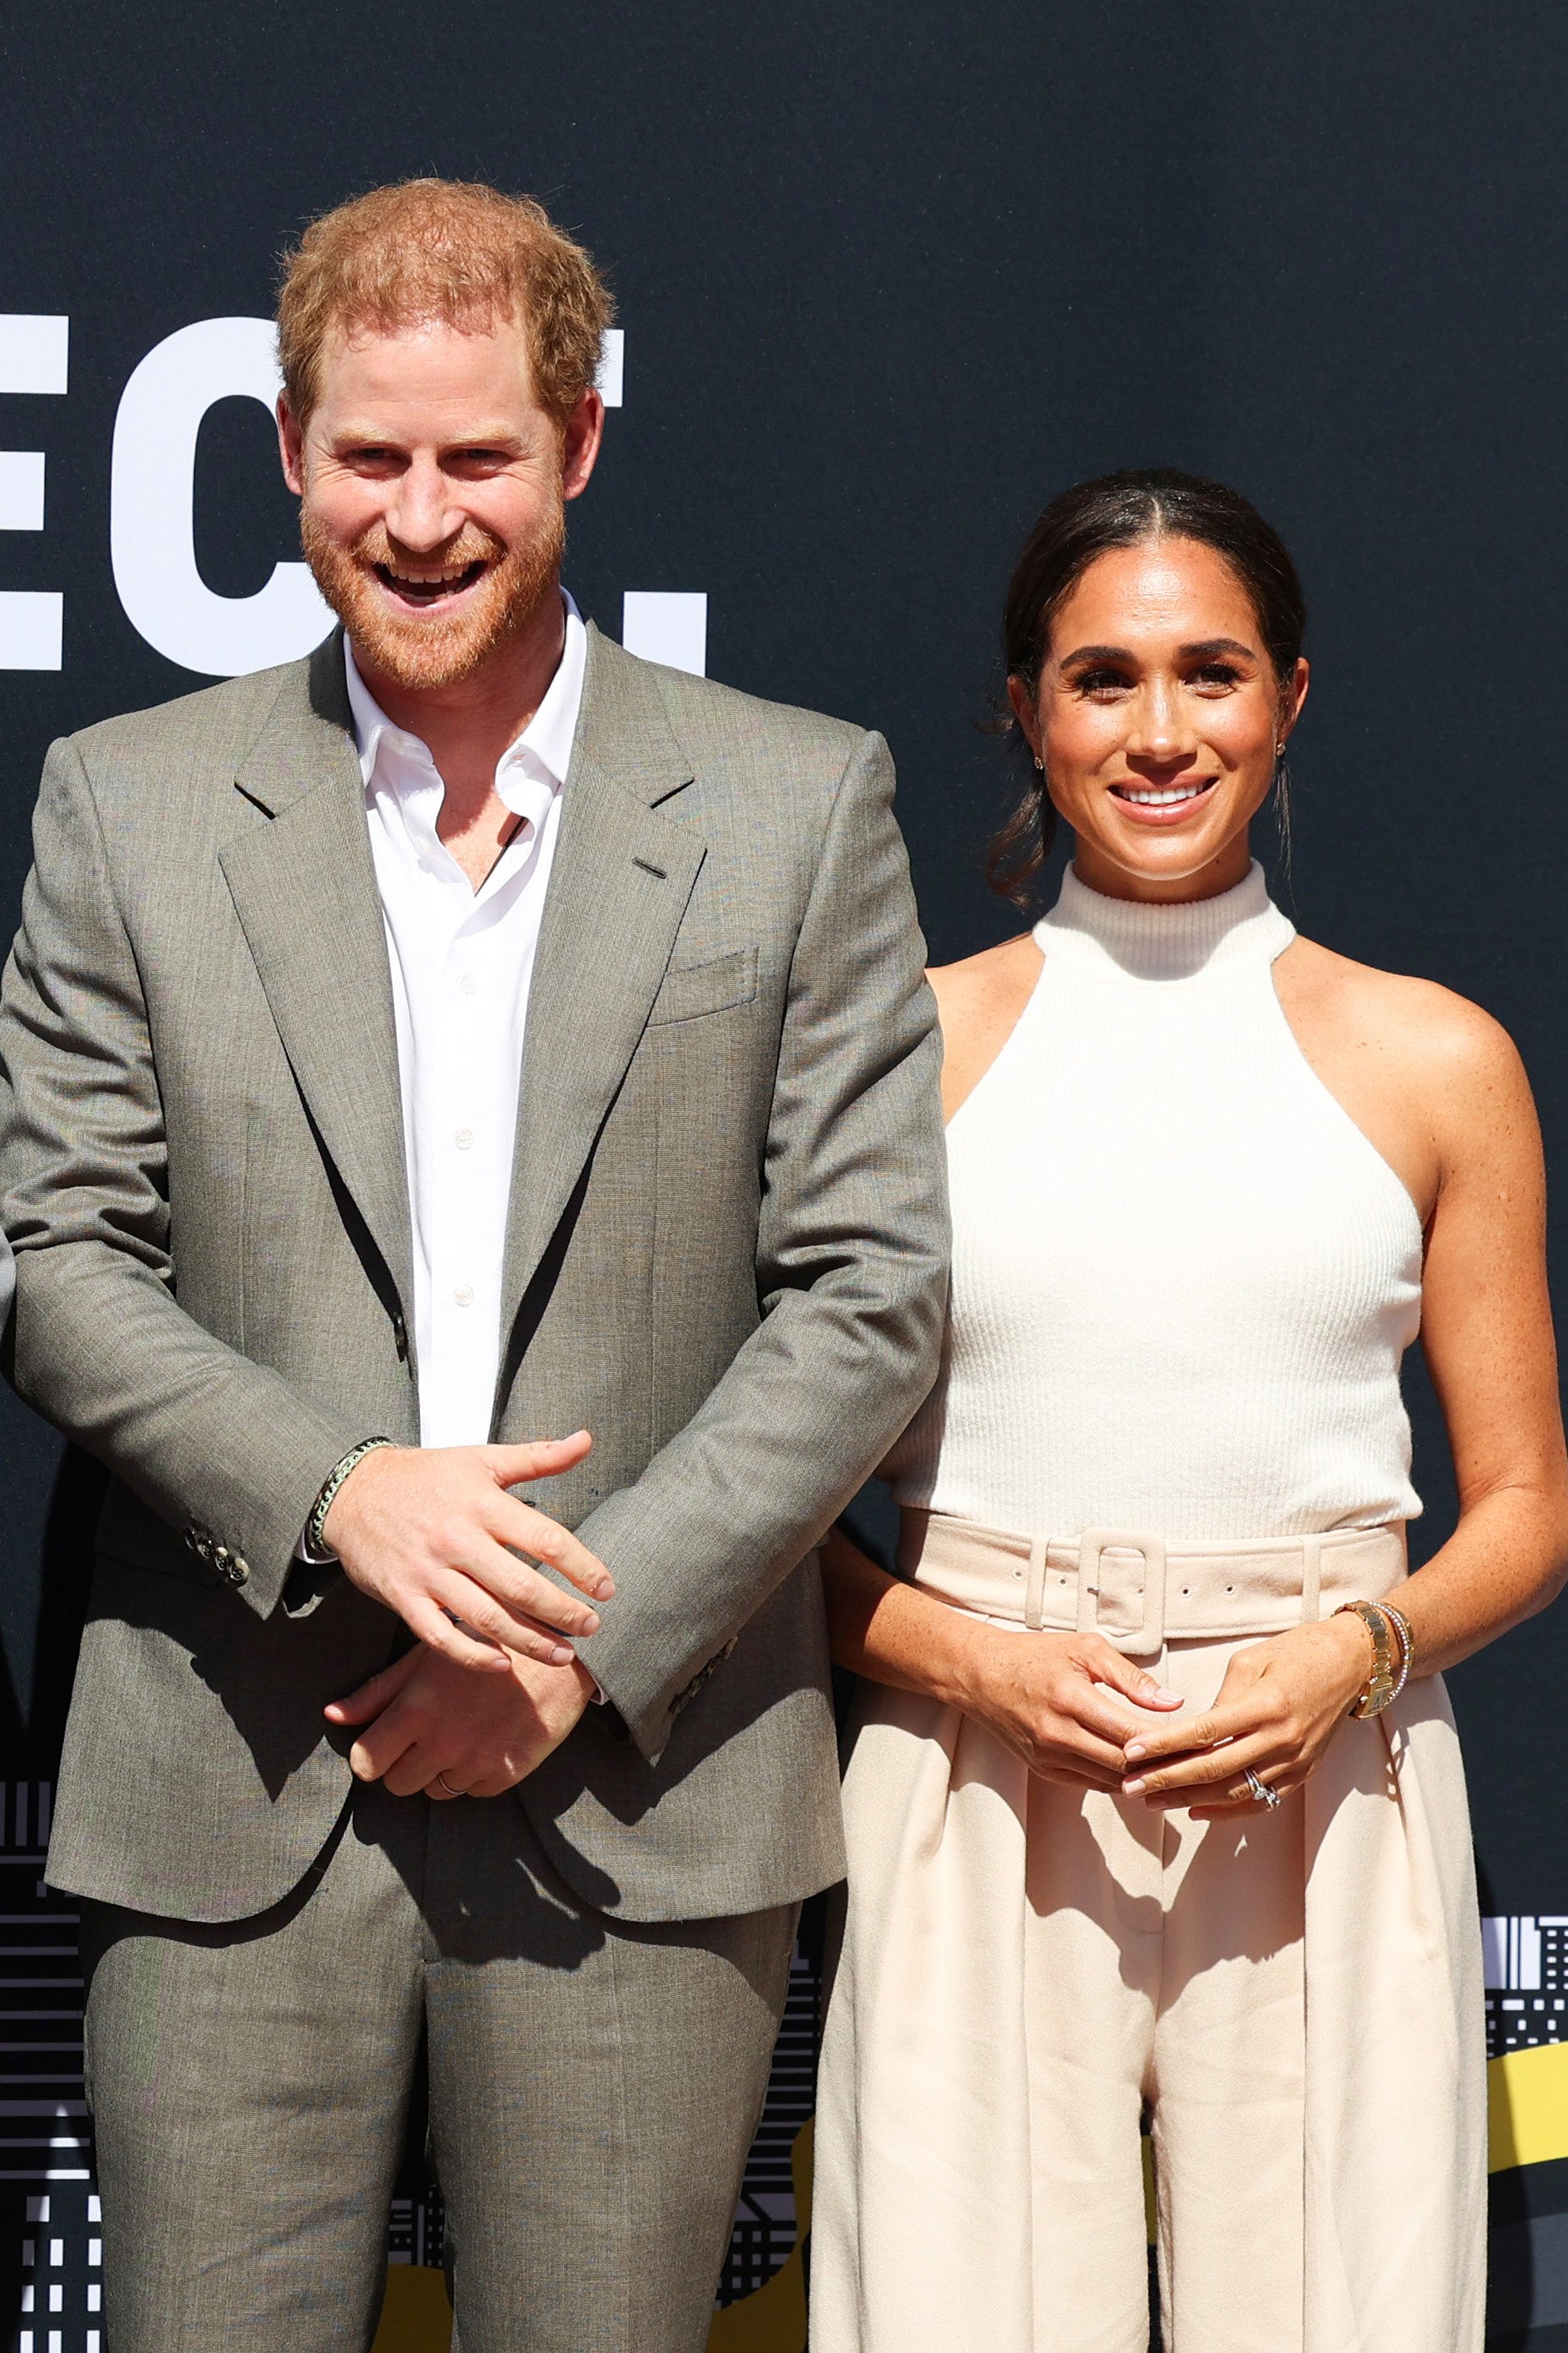 Prince Harry and Meghan arrive at the Invictus Games Dusseldorf 2023 - One Year To Go events on September 06, 2022, in Dusseldorf, Germany. | Source: Getty Images